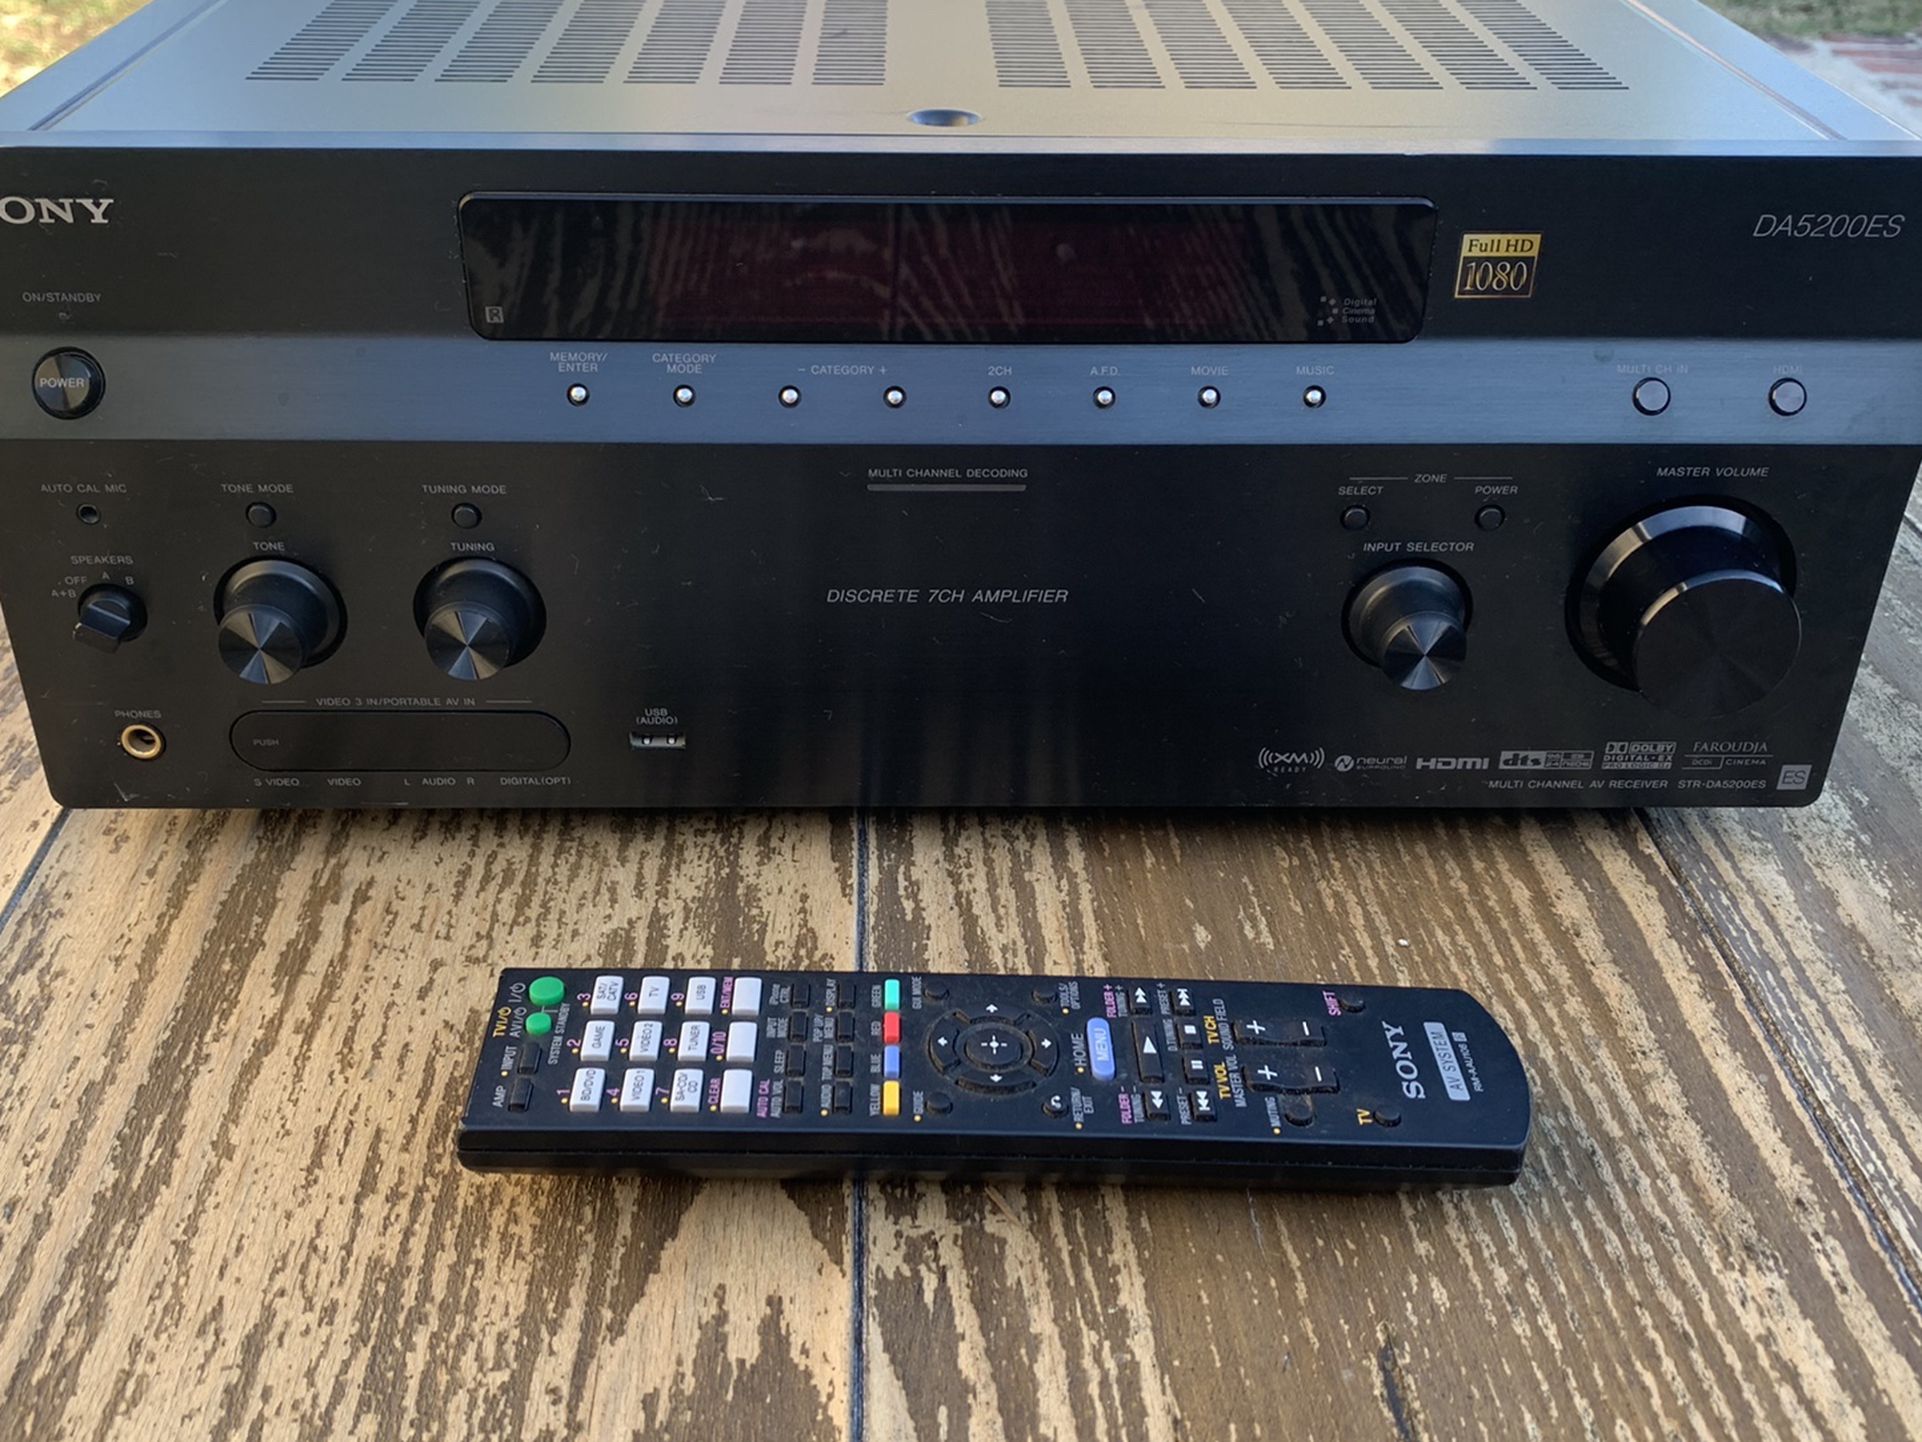 Sony STR-DA5200ES 7.1 Channel Home Theater Receiver - Tested And Working